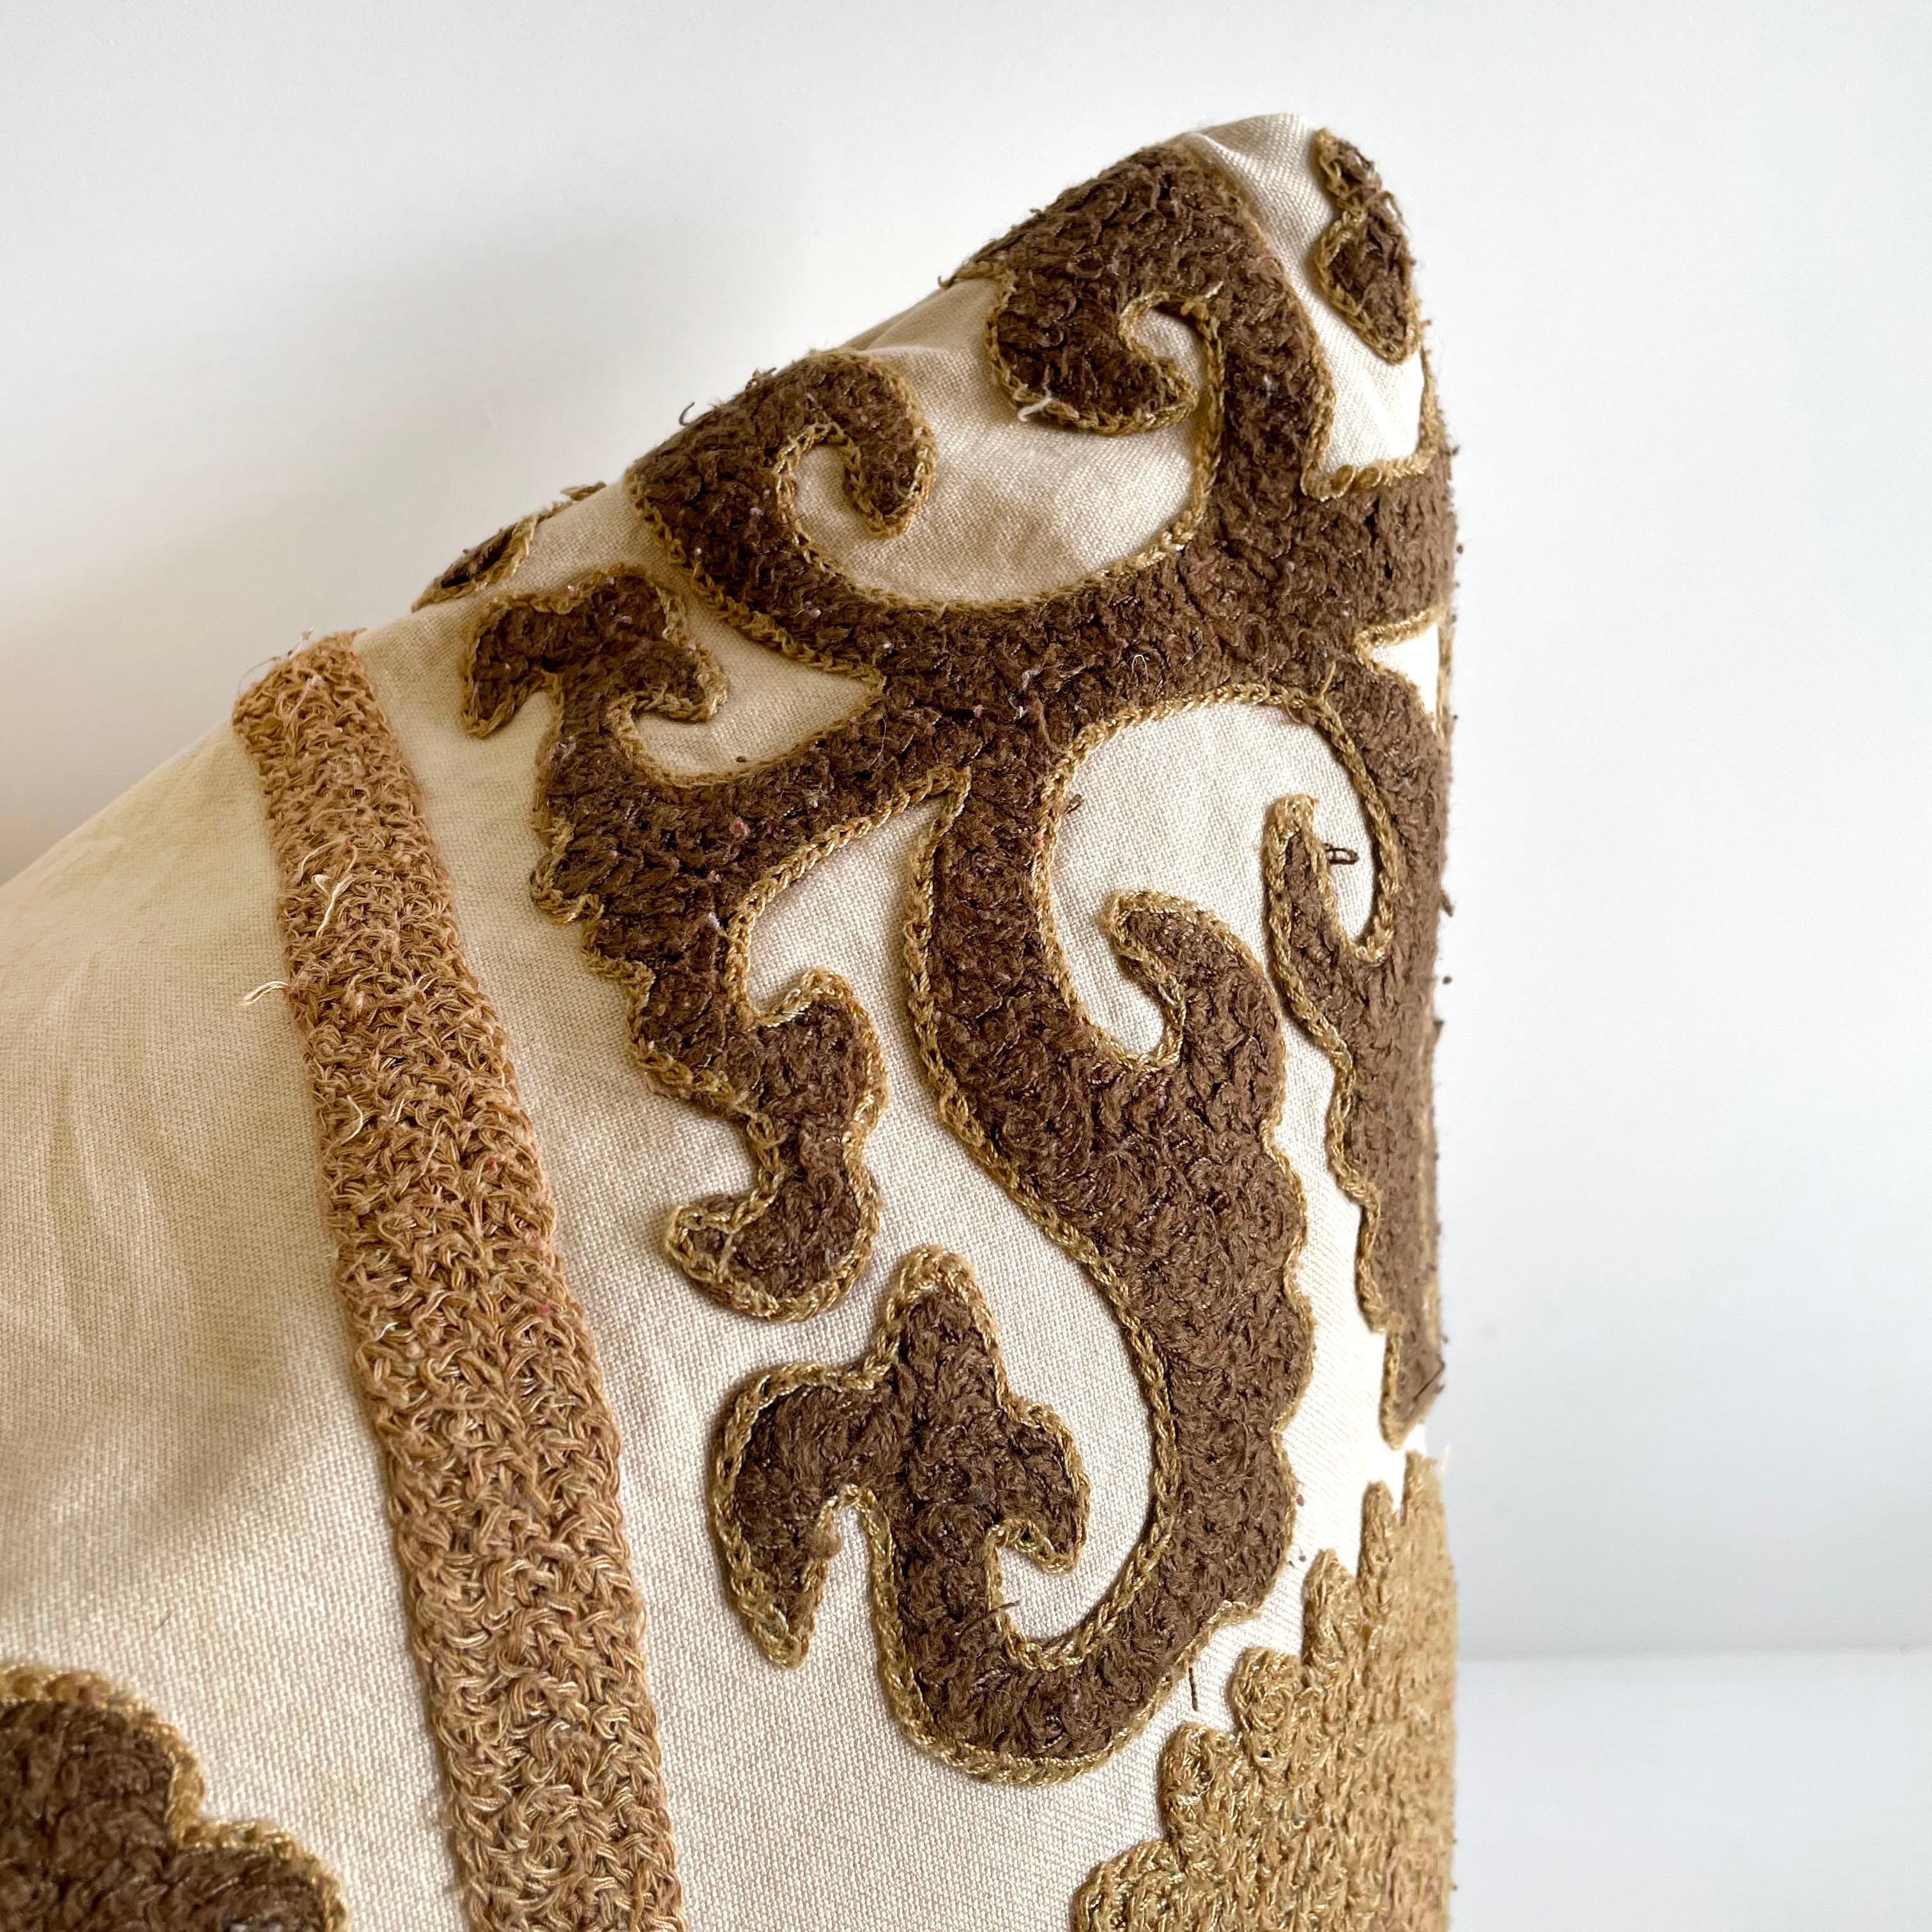 Vintage brown and tan embroidered Suzani on a natural muslin background. This vintage textile pillow face features a vintage Suzann quilt, natural linen colored background with original hand embroidery. The backing is 100% Belgian linen in natural